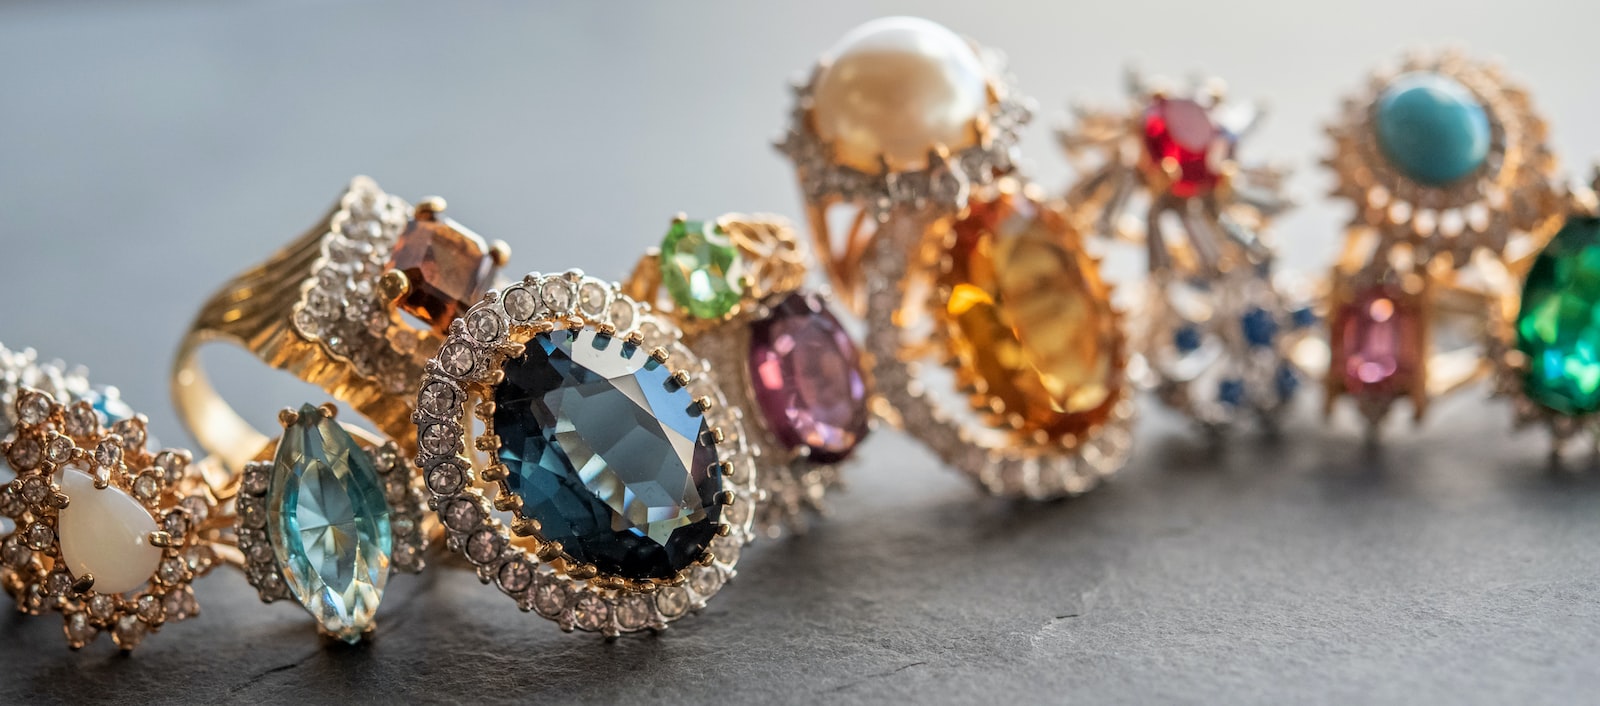 A Complete List of Jewelry Types: From Earrings to Bracelets